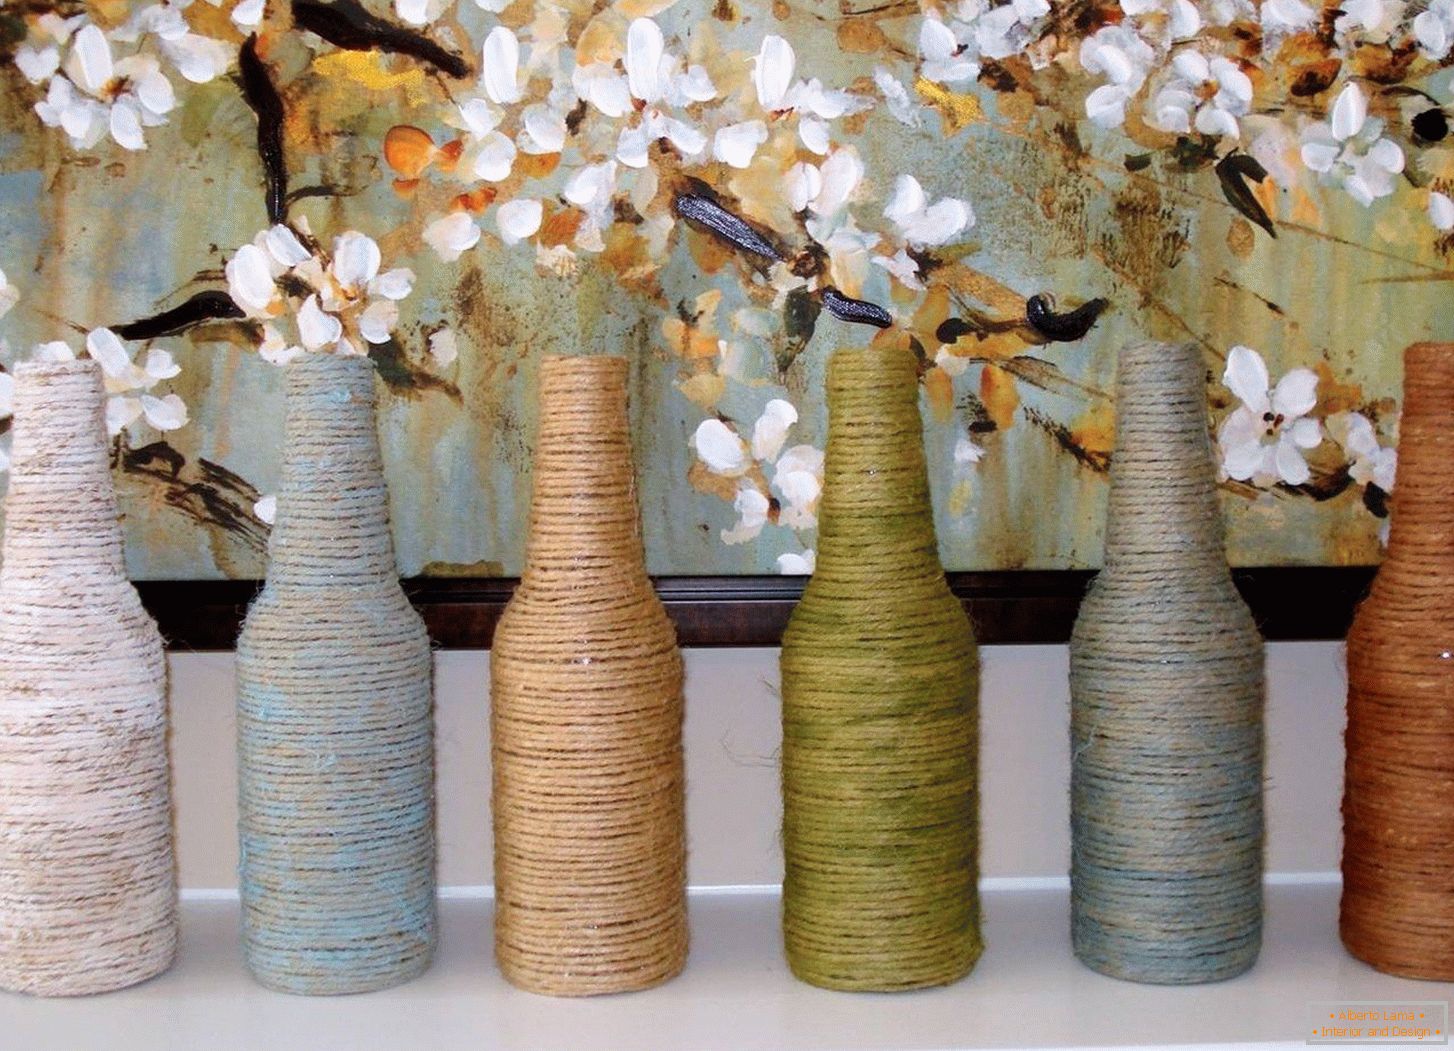 Bottles with decor threads